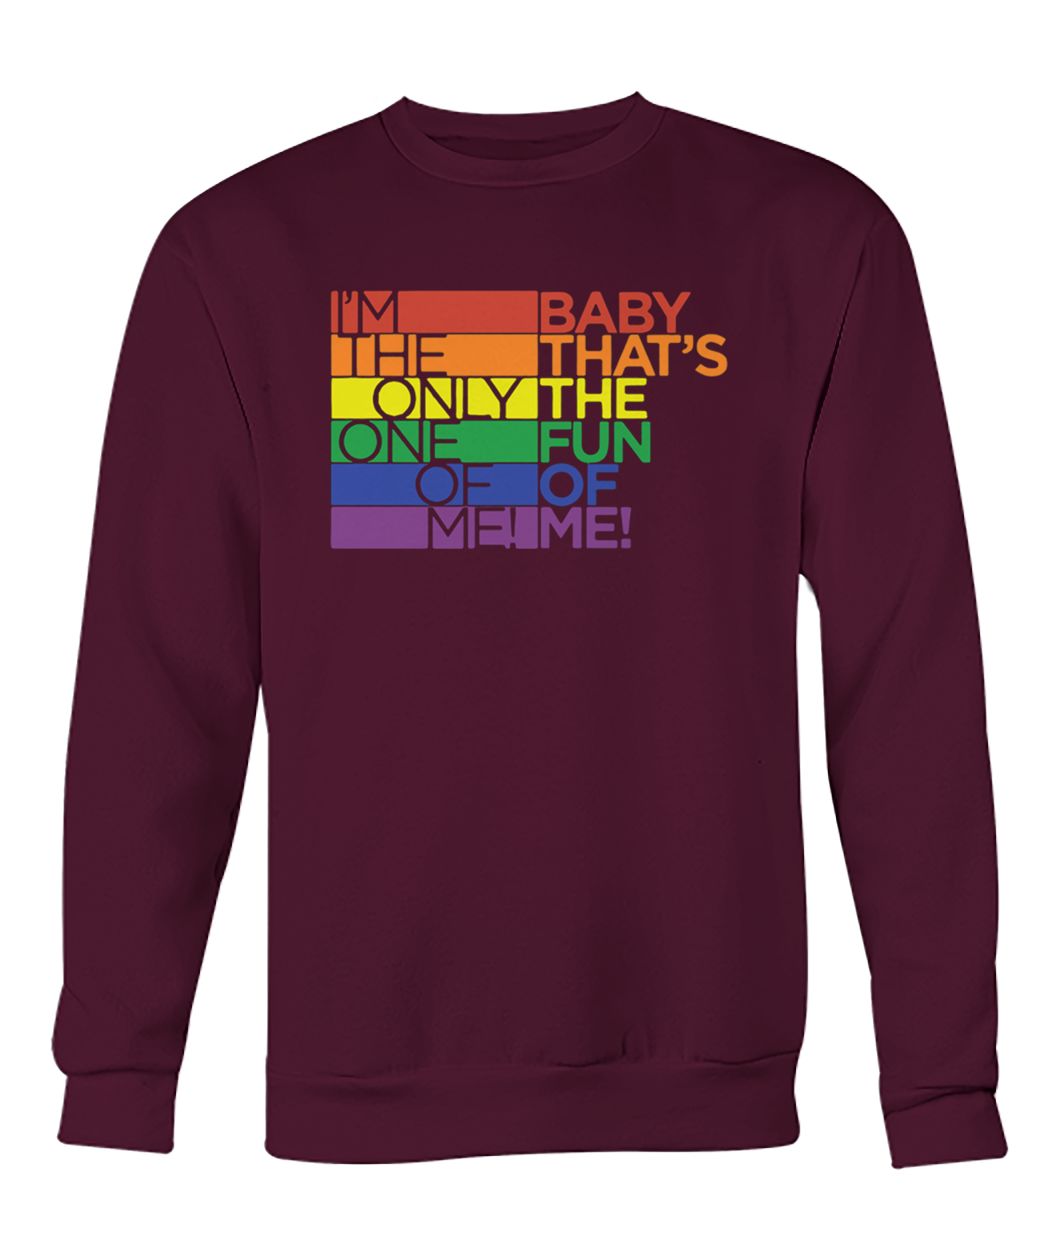 LGBT I'm the only one of me baby that's the fun of me crew neck sweatshirt